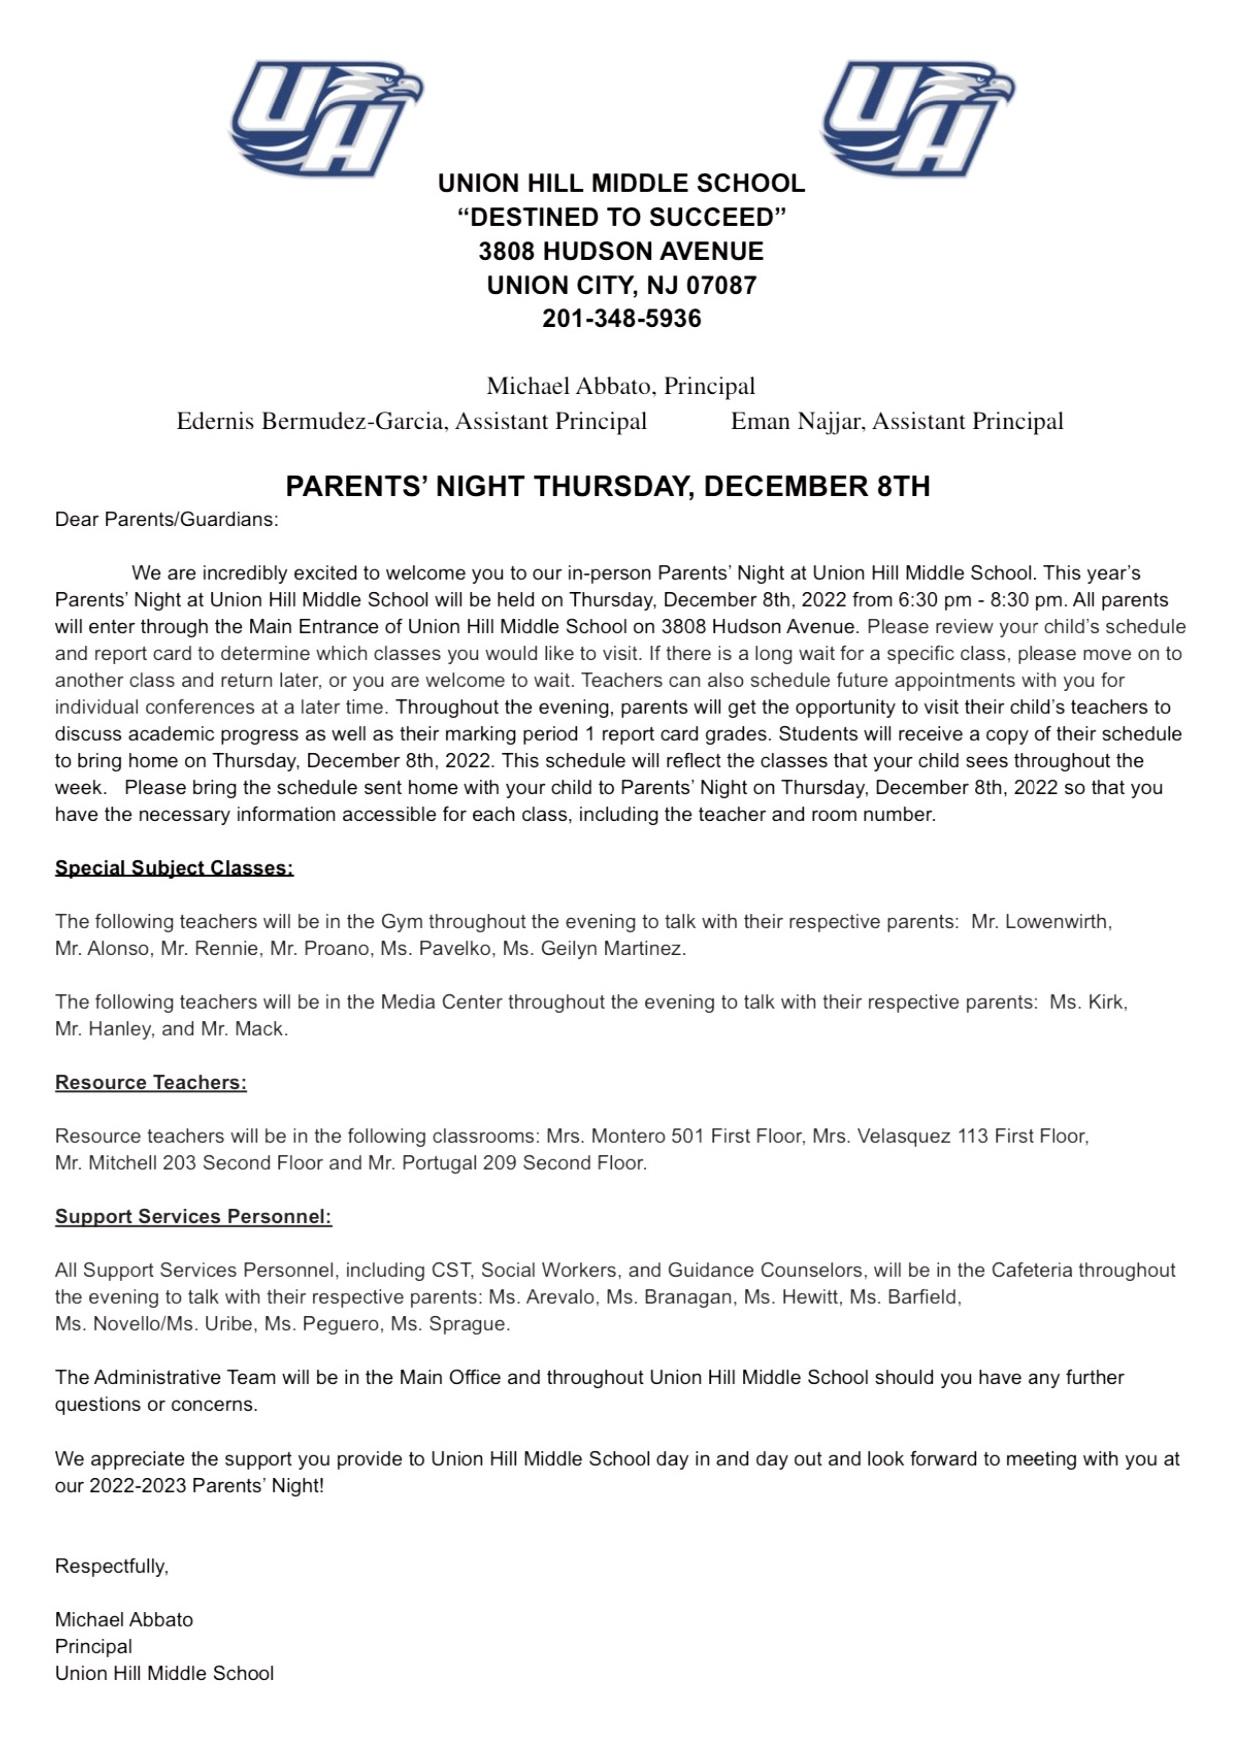 Parent's Night Notification Letter-English